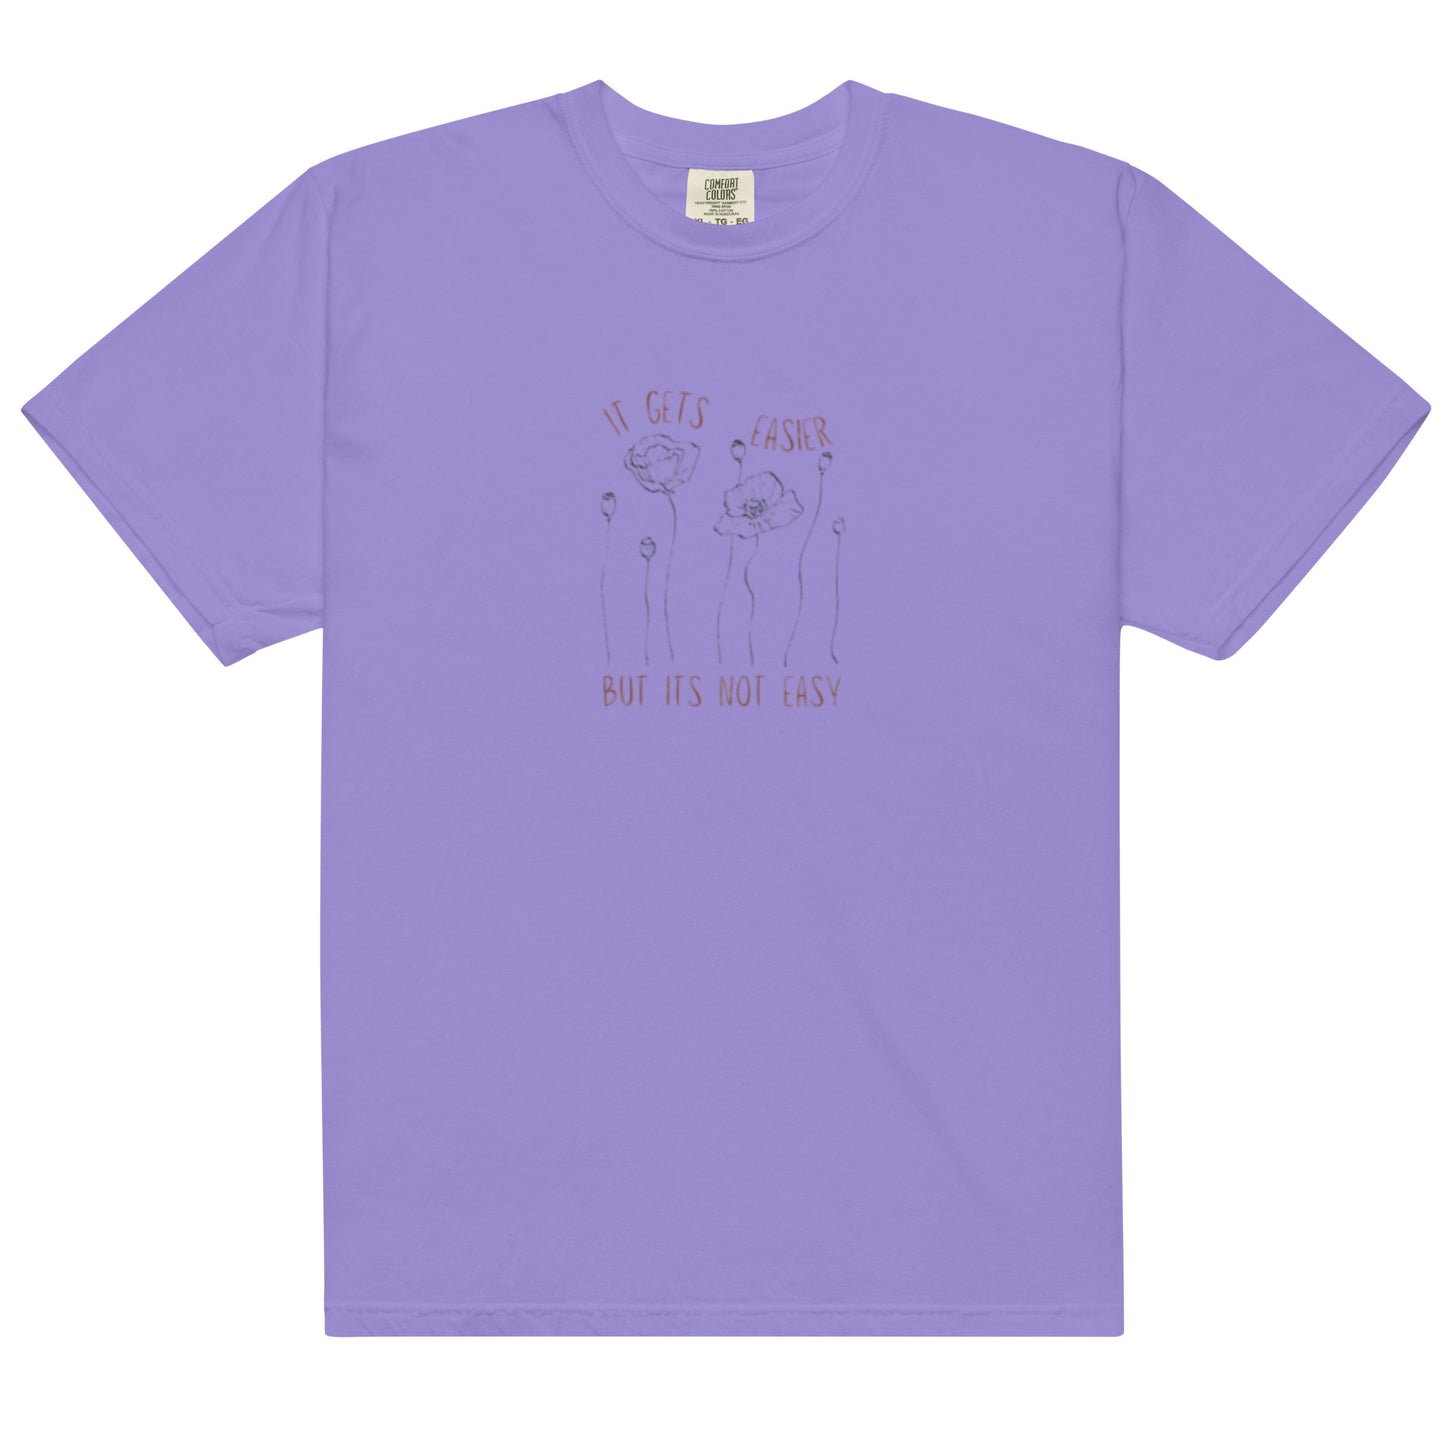 IT GETS EASIER - T-shirt